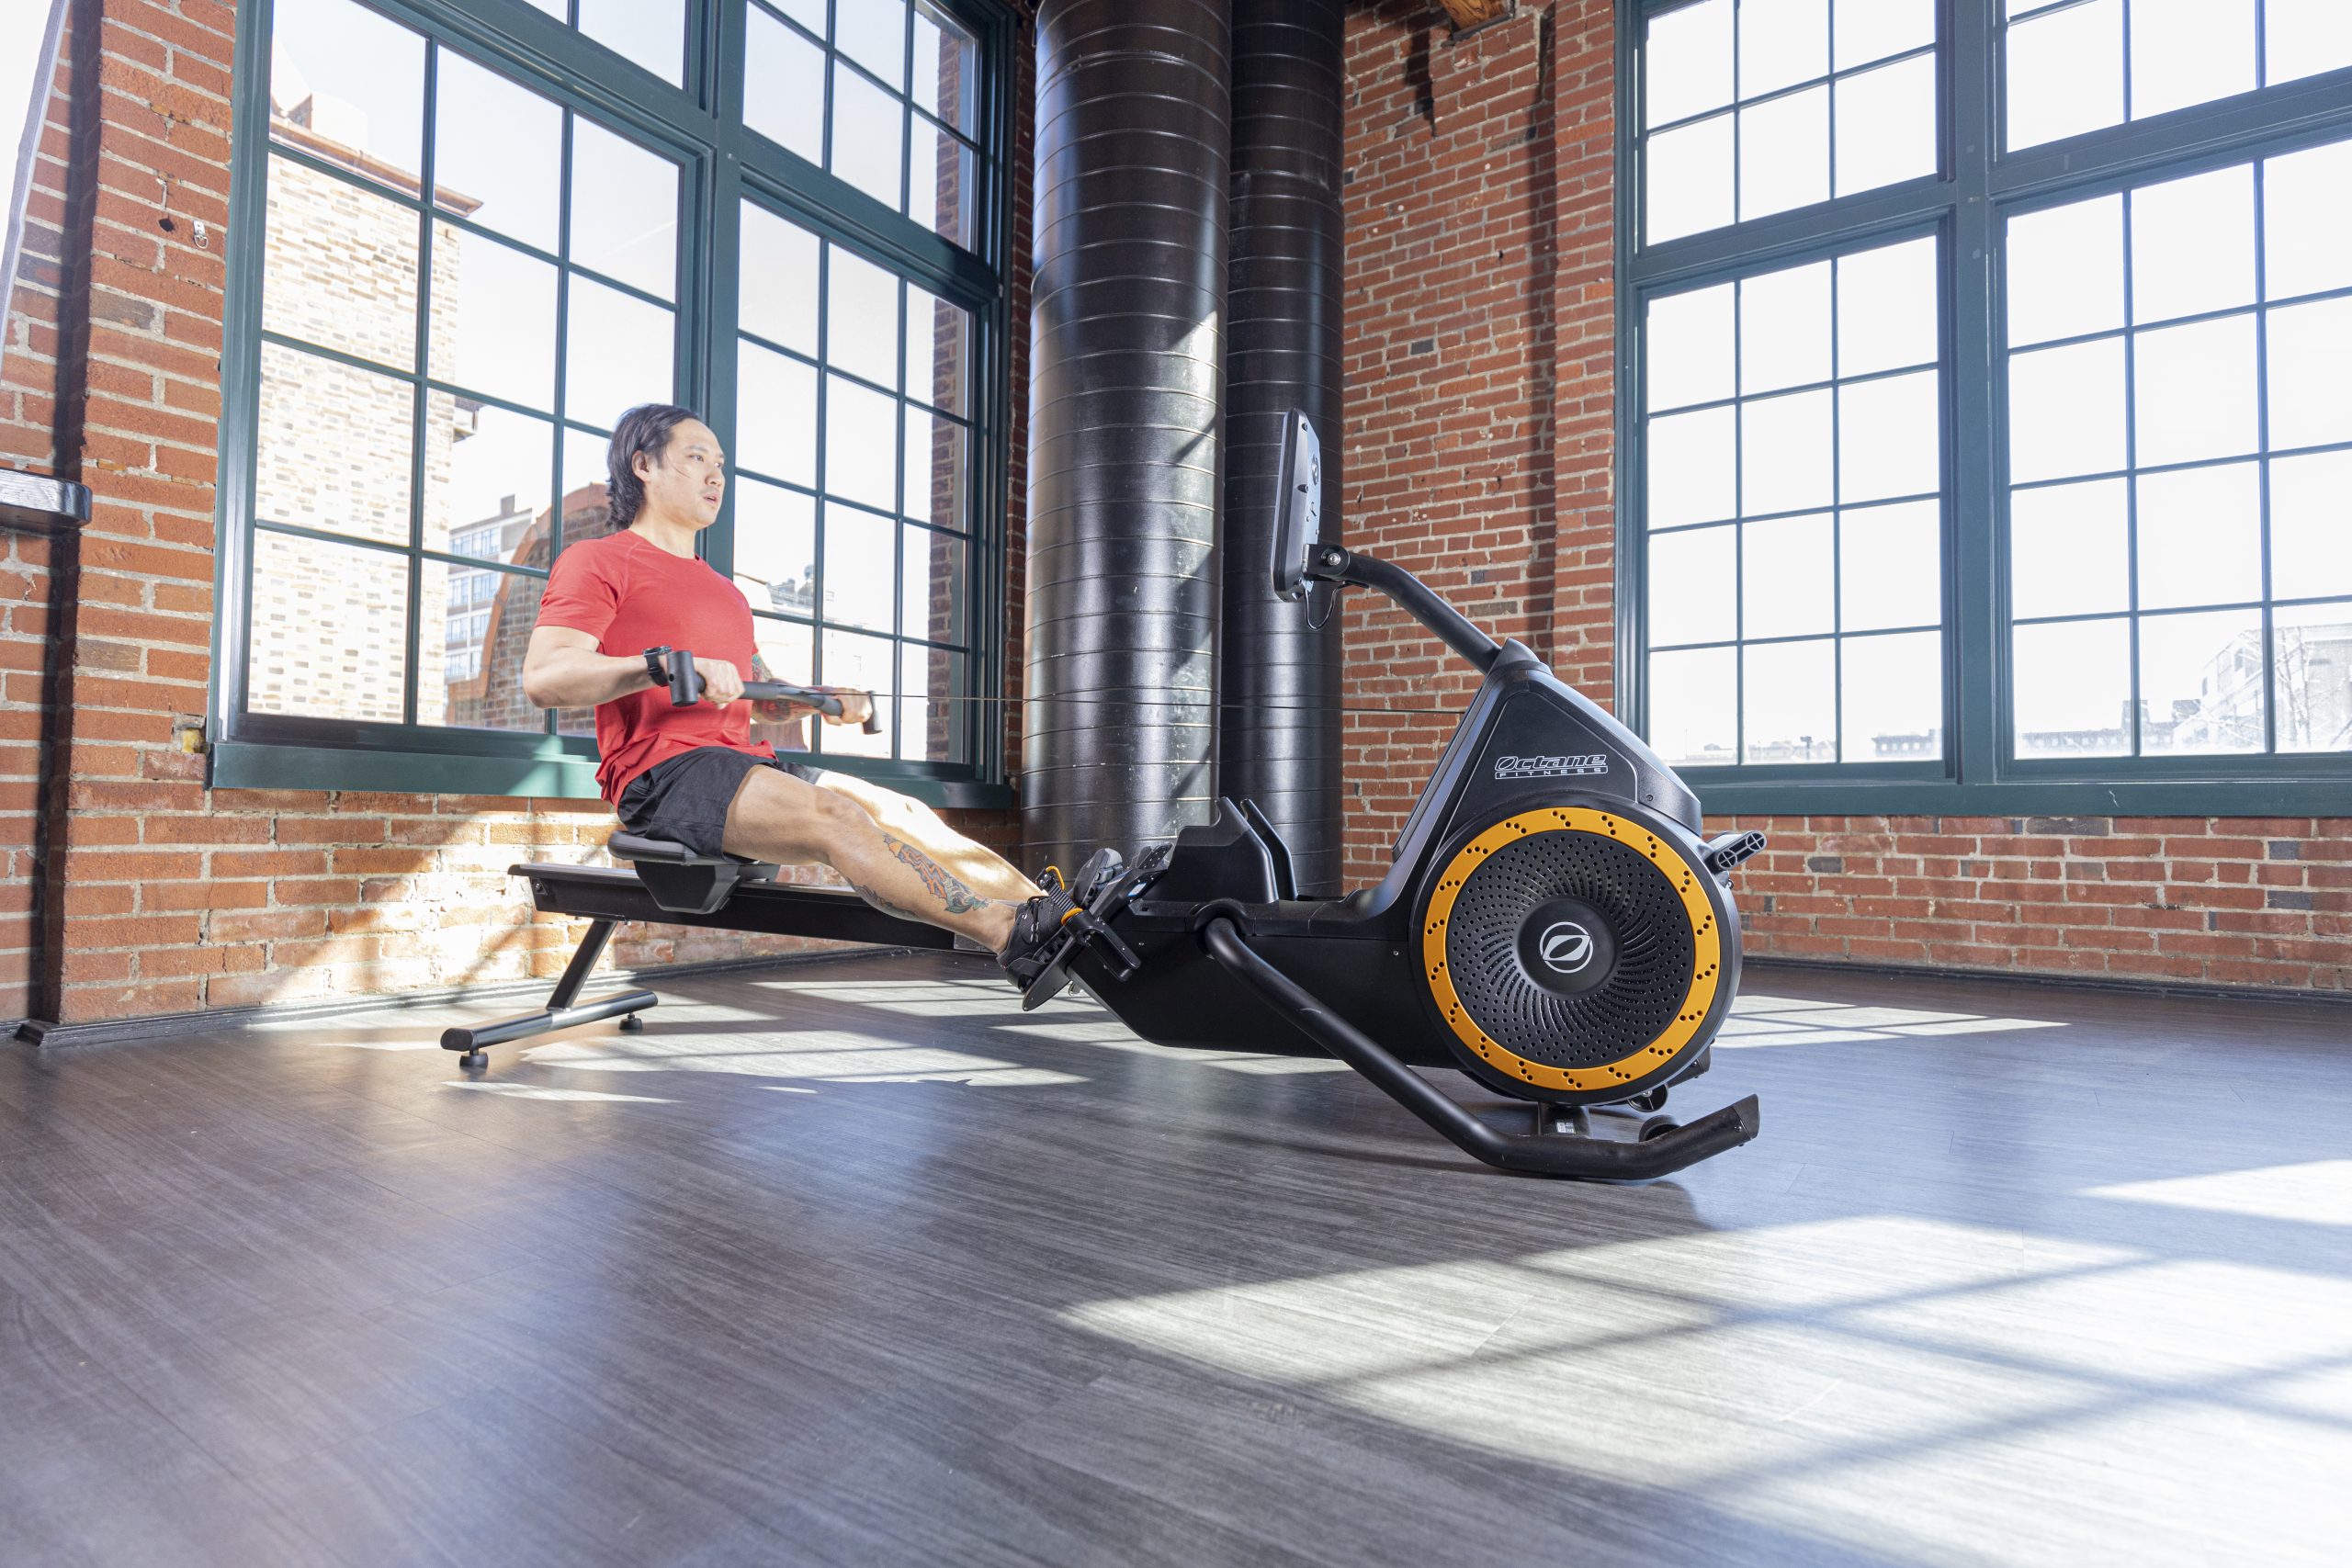 Commercial Cardio Equipment Octane Fitness, 54% OFF